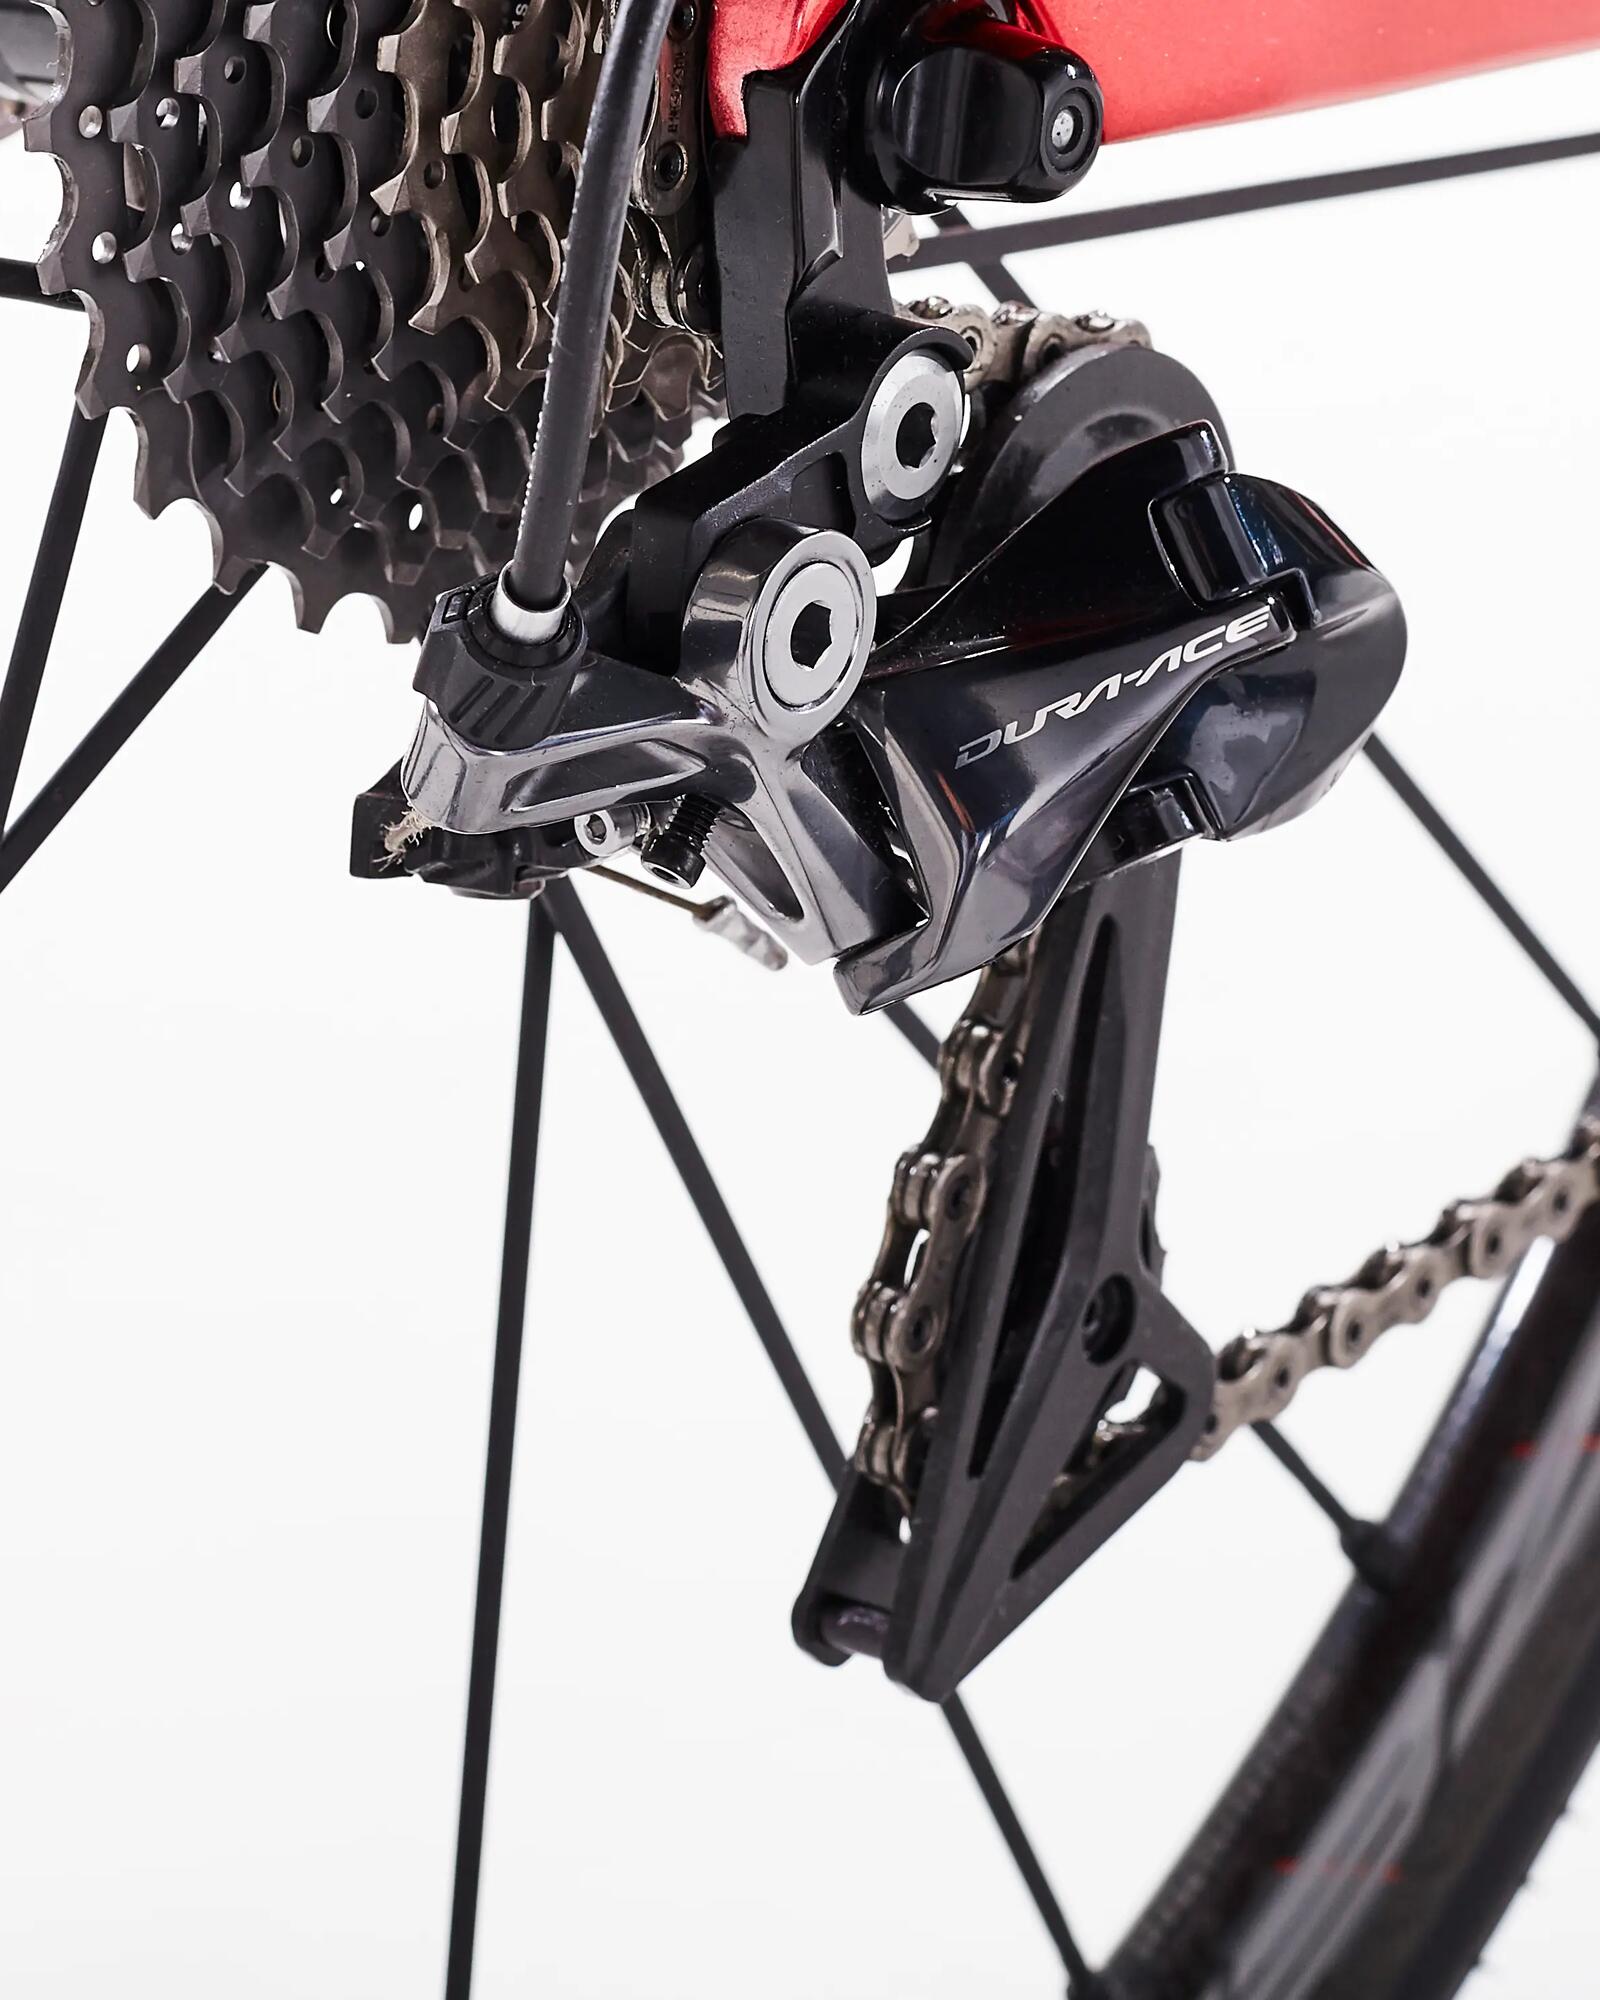 A Buyer's Guide to Choosing the Right Derailleur